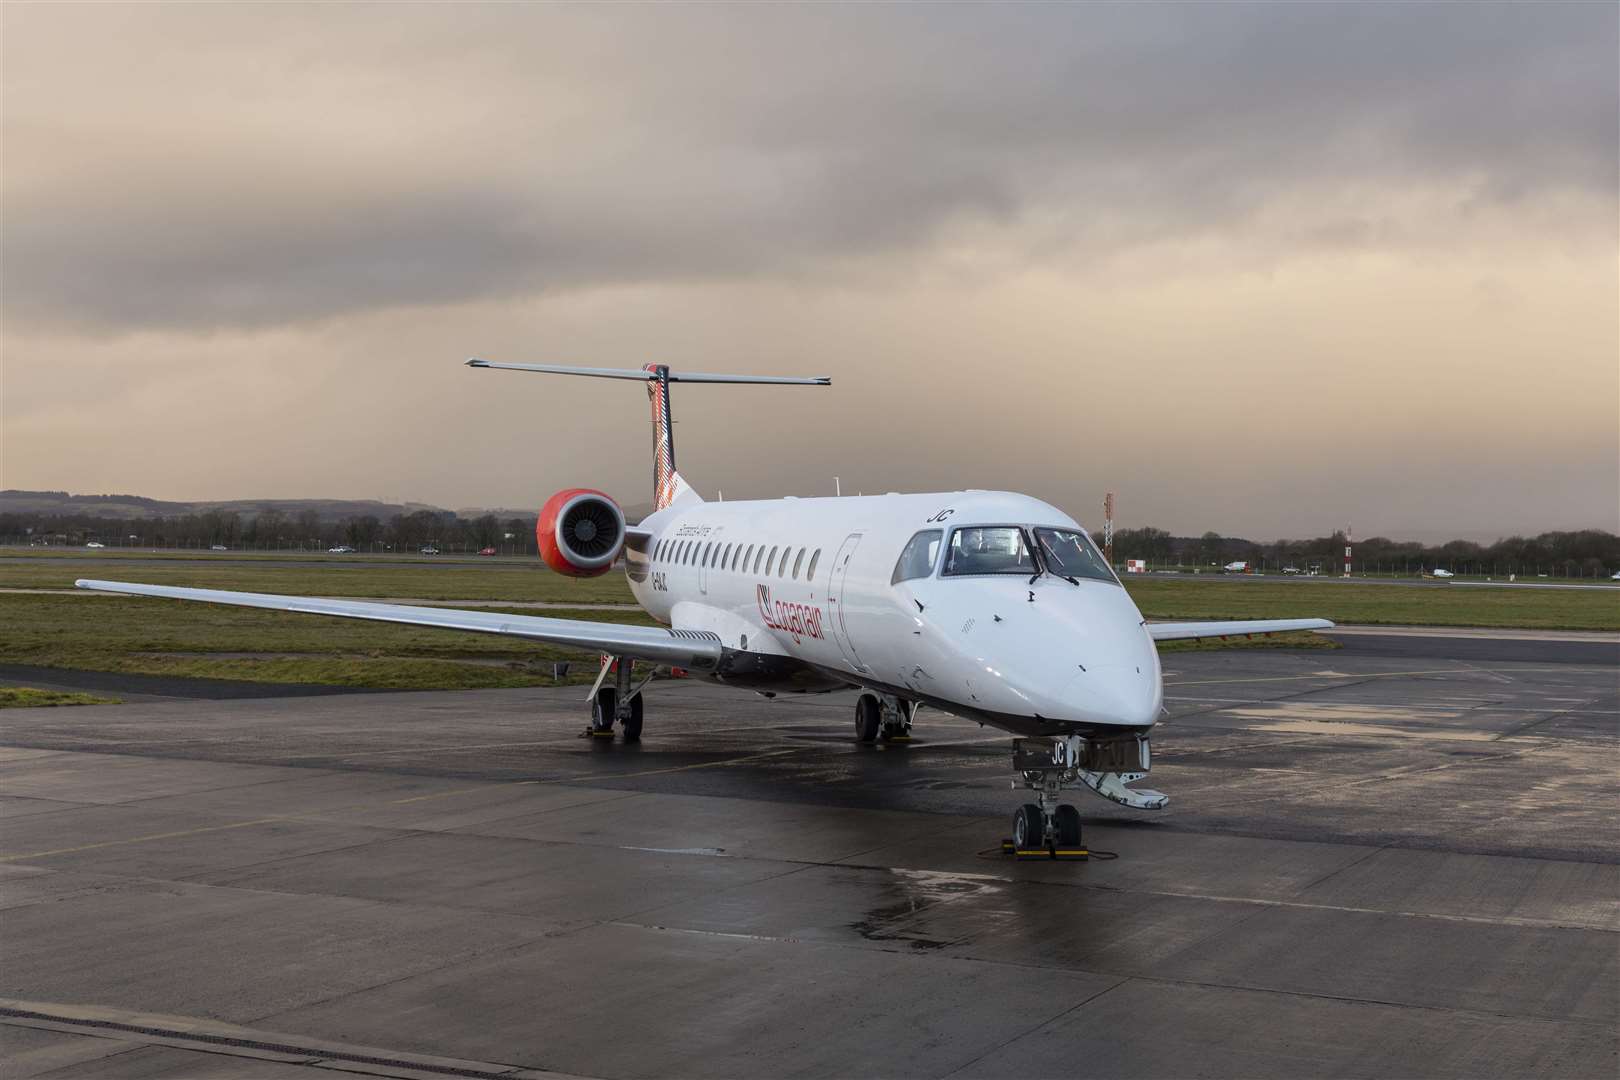 The Loganair Embraer 145 which was used on the Inverness-East Midlands route which will end on January 5.